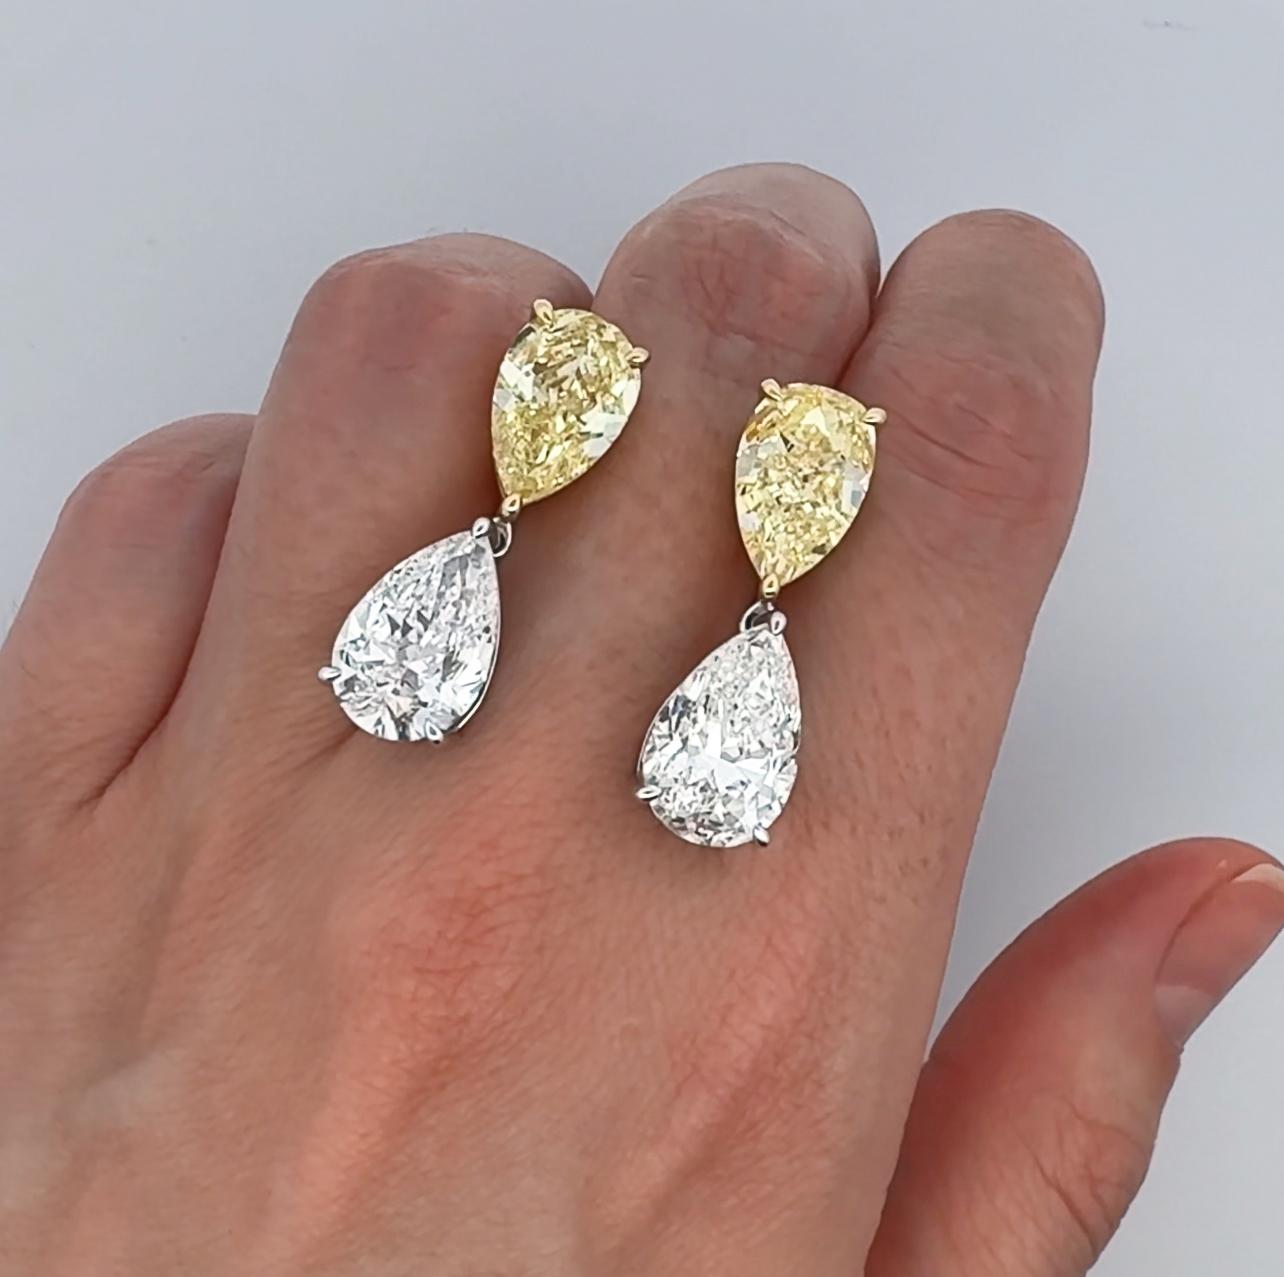 Sensational and important fancy intense yellow and white diamond drop earrings. Incredibly rare to match such stones, a piece like this is typically seen only in the major high jewelry house and major auction houses. Each stone GIA certified. High